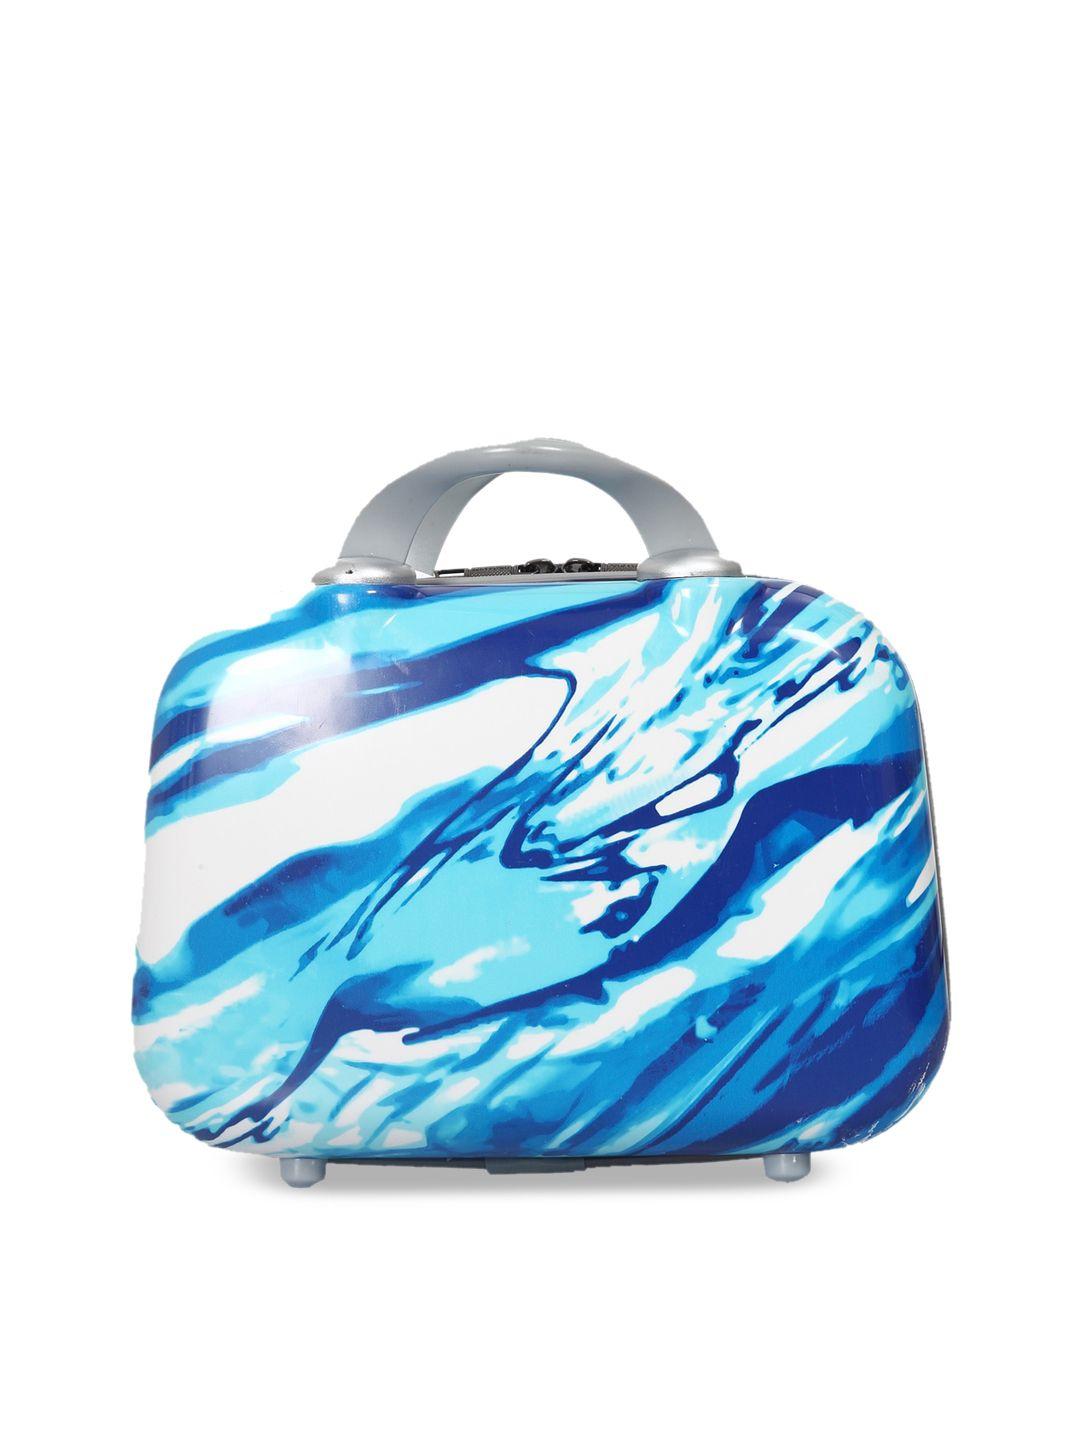 polo class blue & white printed hard-sided travel vanity suitcase